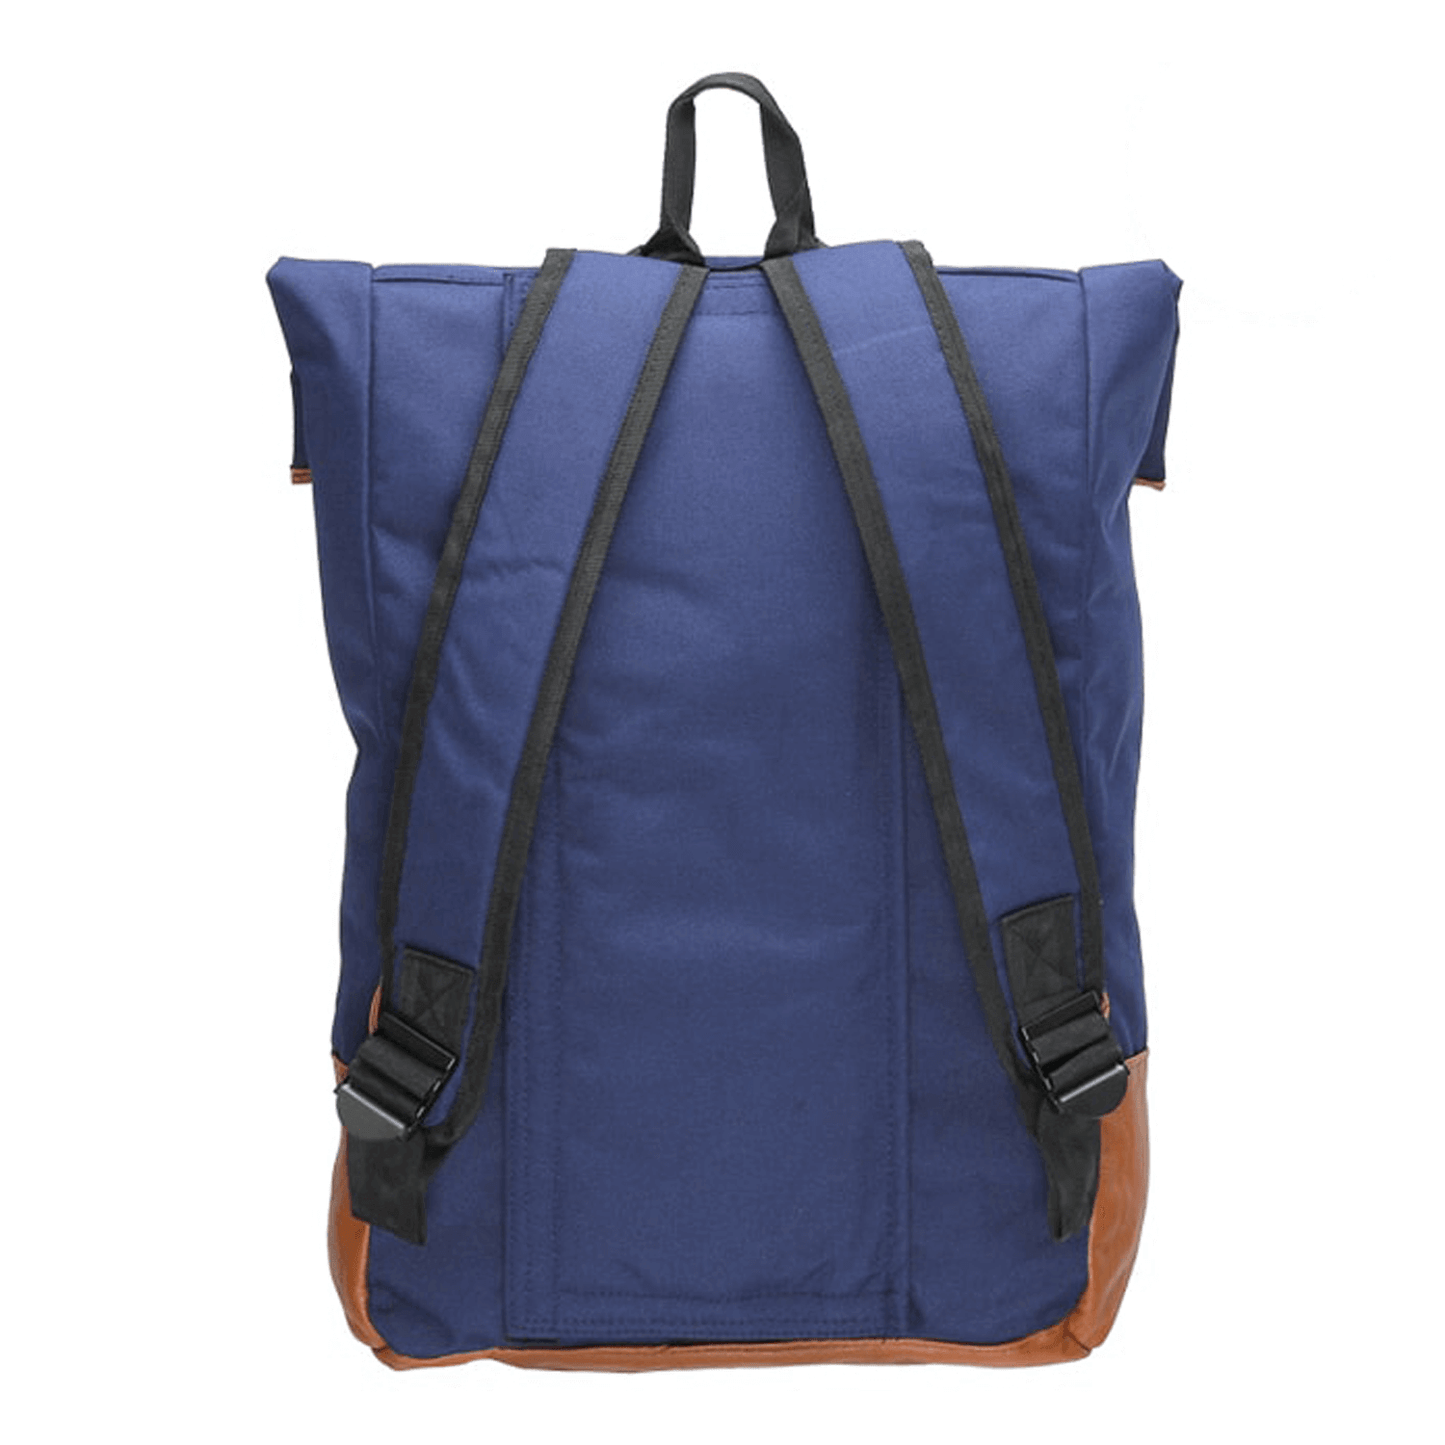 AWOL DAILY Large Blue Backpack 886173 Harvest & Extraction 853336007973